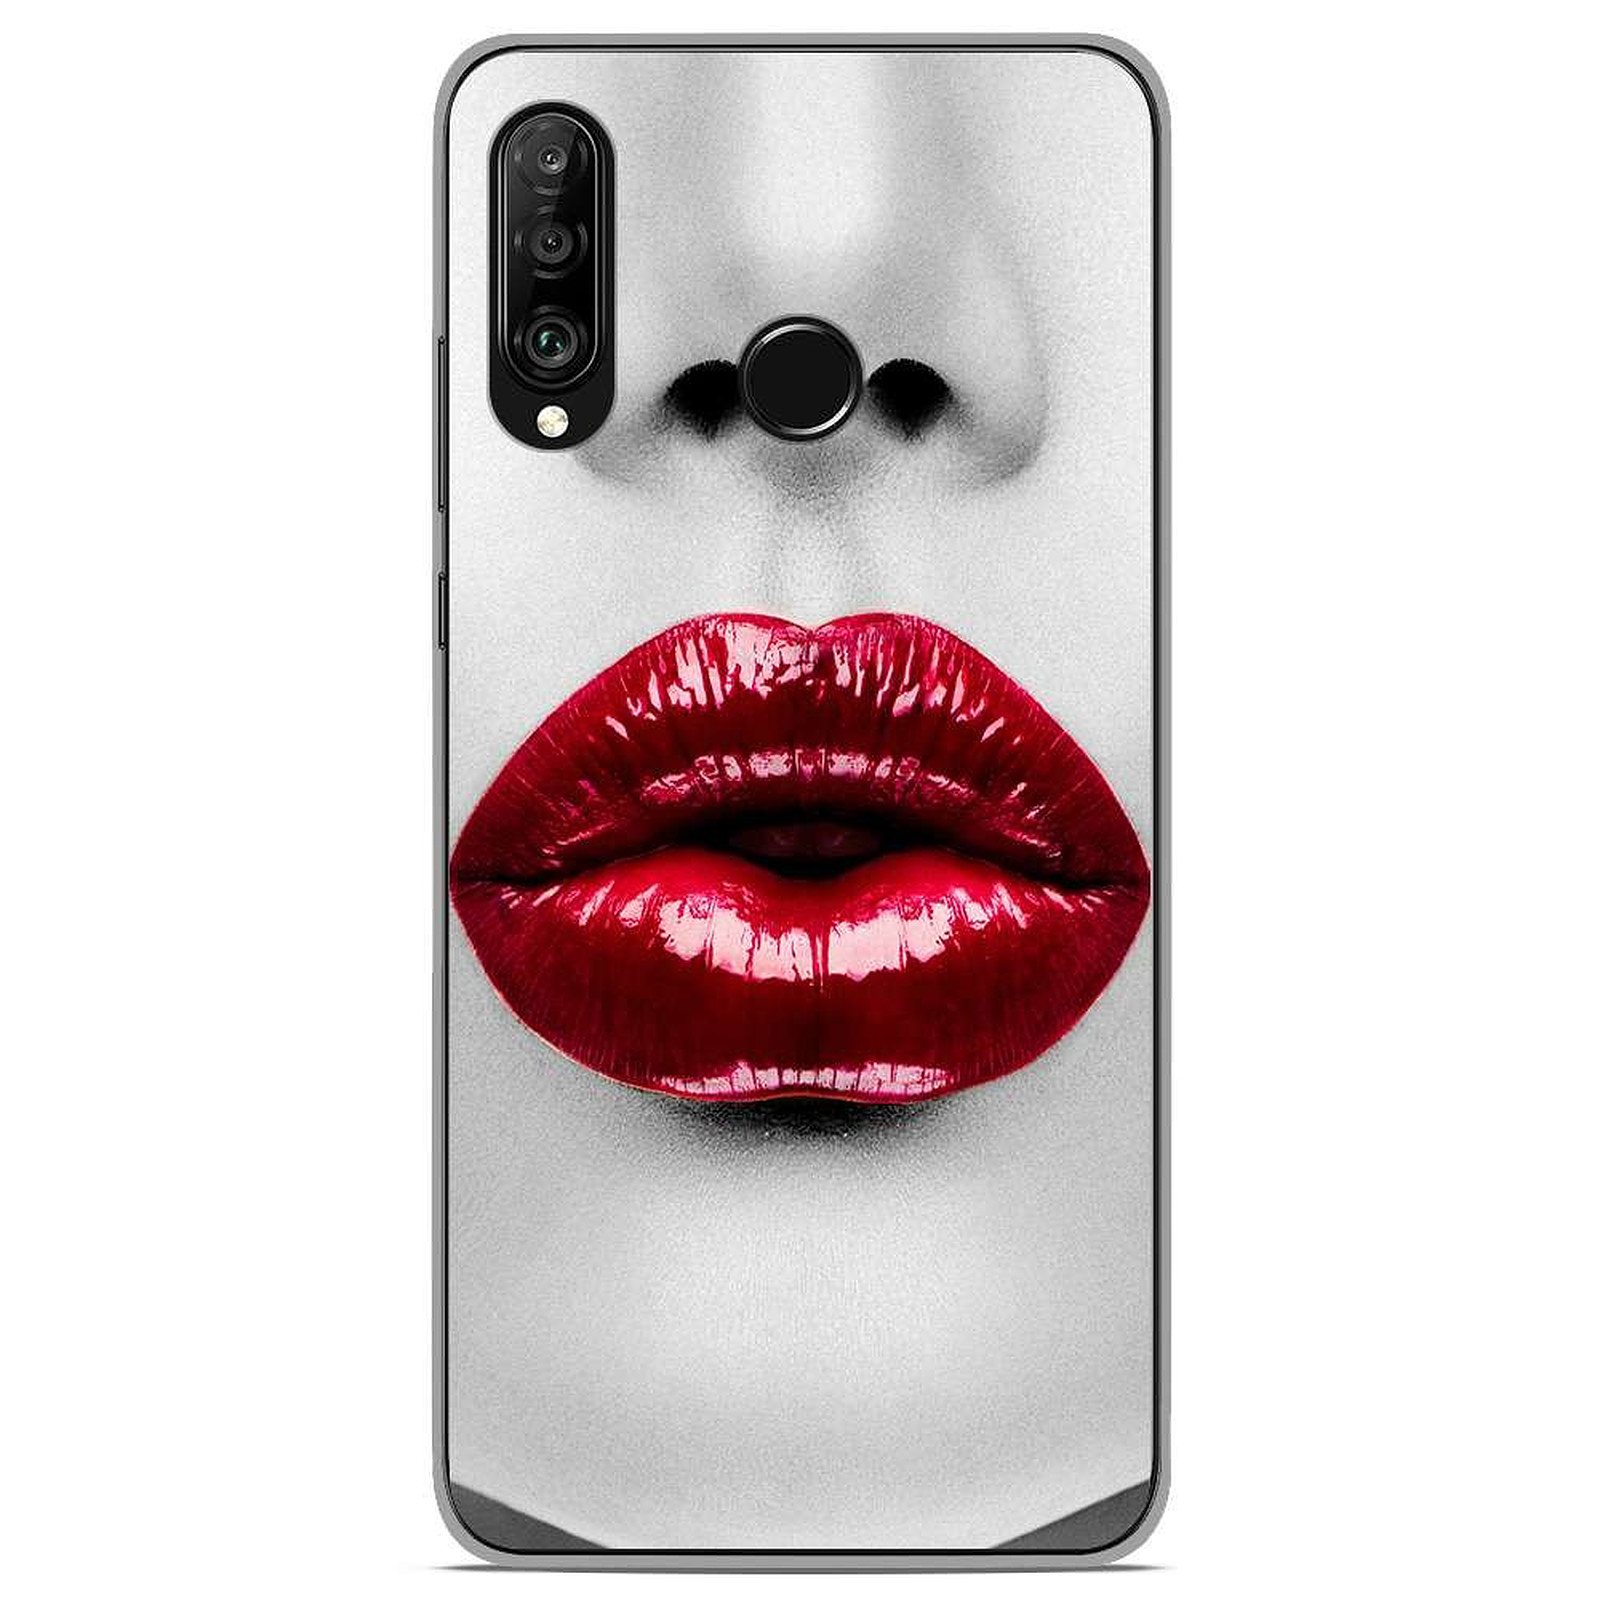 1001 Coques Coque silicone gel Huawei P30 Lite motif Lèvres Rouges - Coque telephone 1001Coques